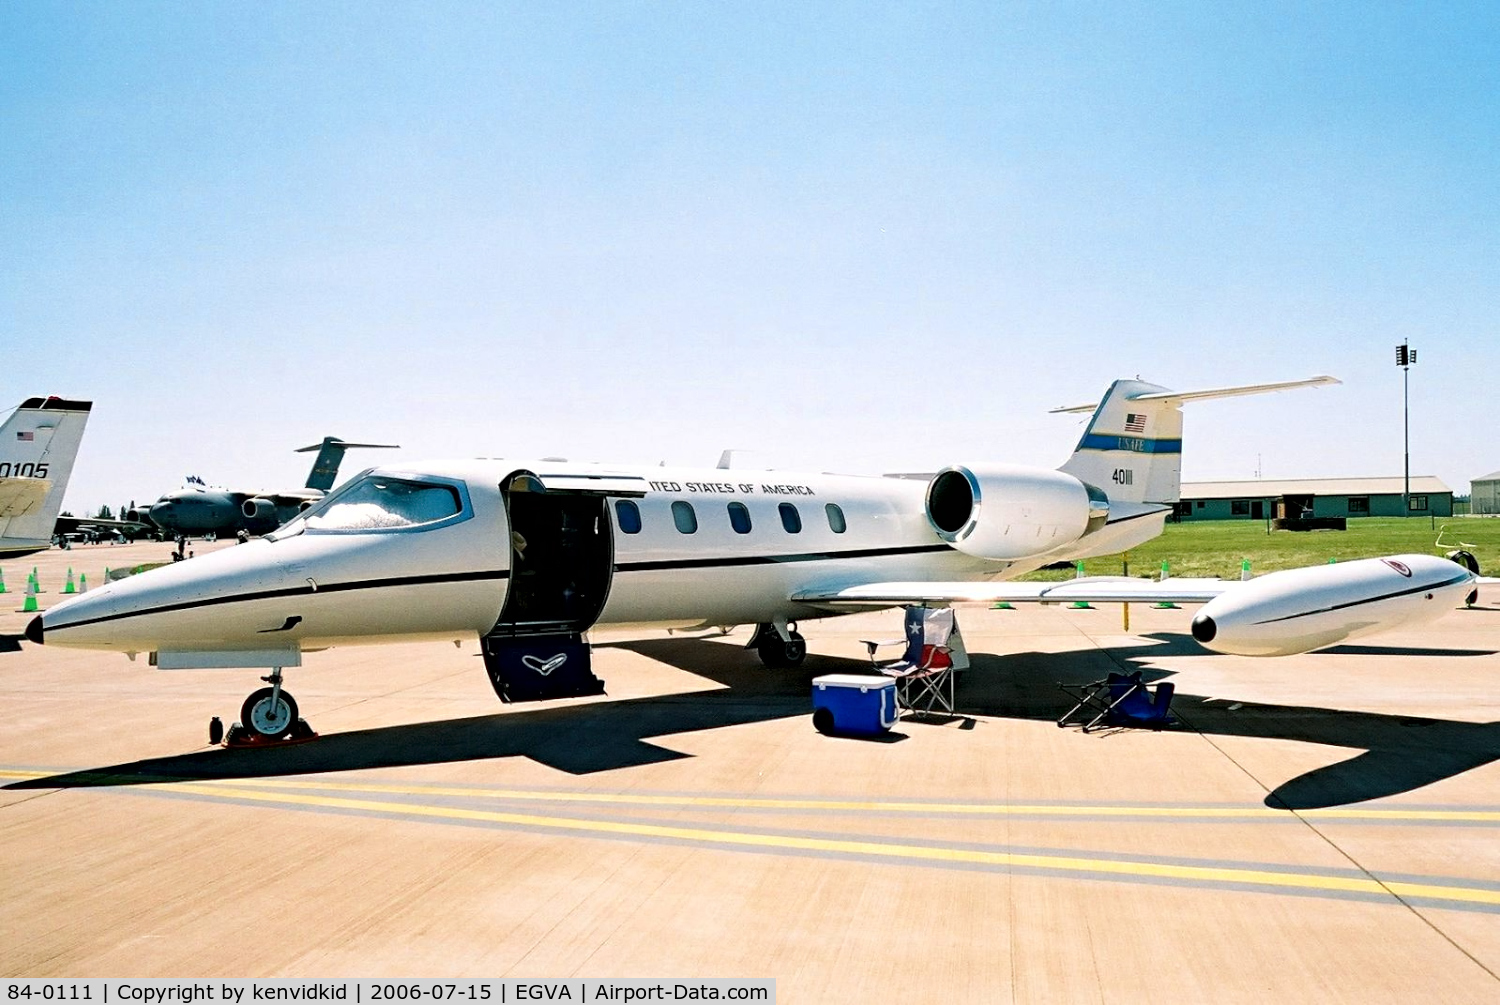 84-0111, 1985 Gates Learjet 35A (C-21A) C/N 35A-557, On static display at RIAT.